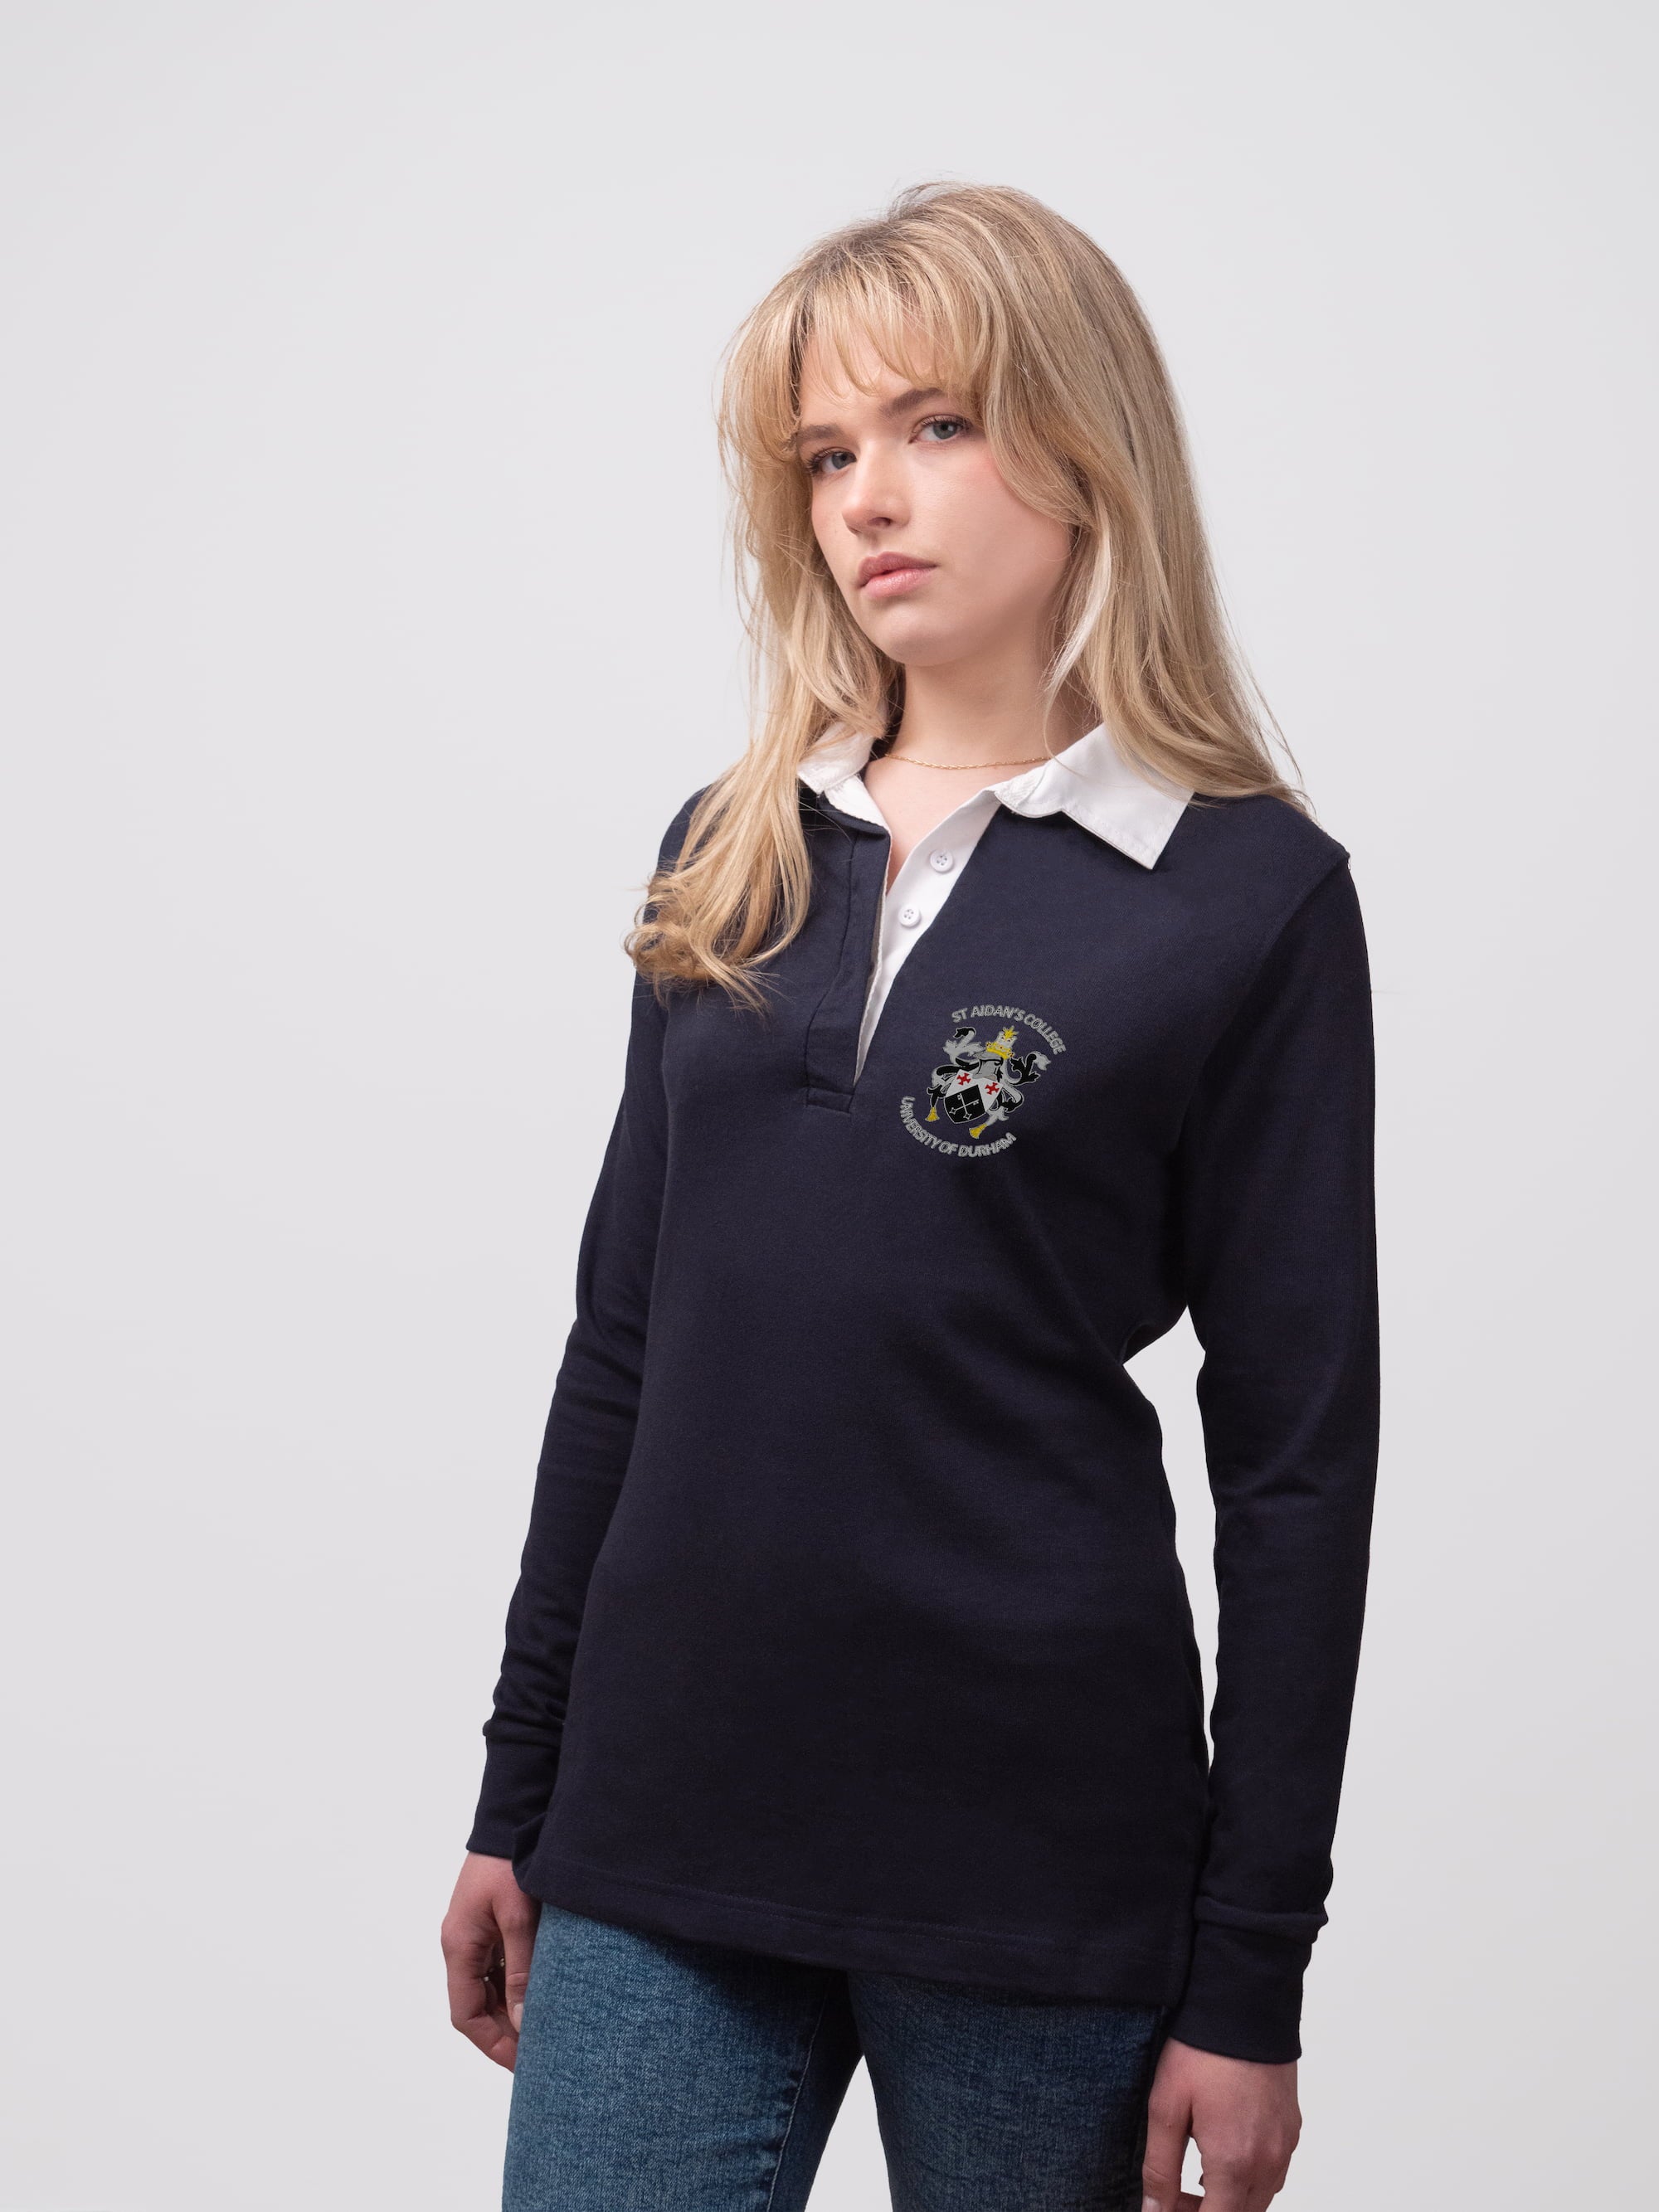 Student wearing a navy St Aidan's College rugby shirt with embroidered crest